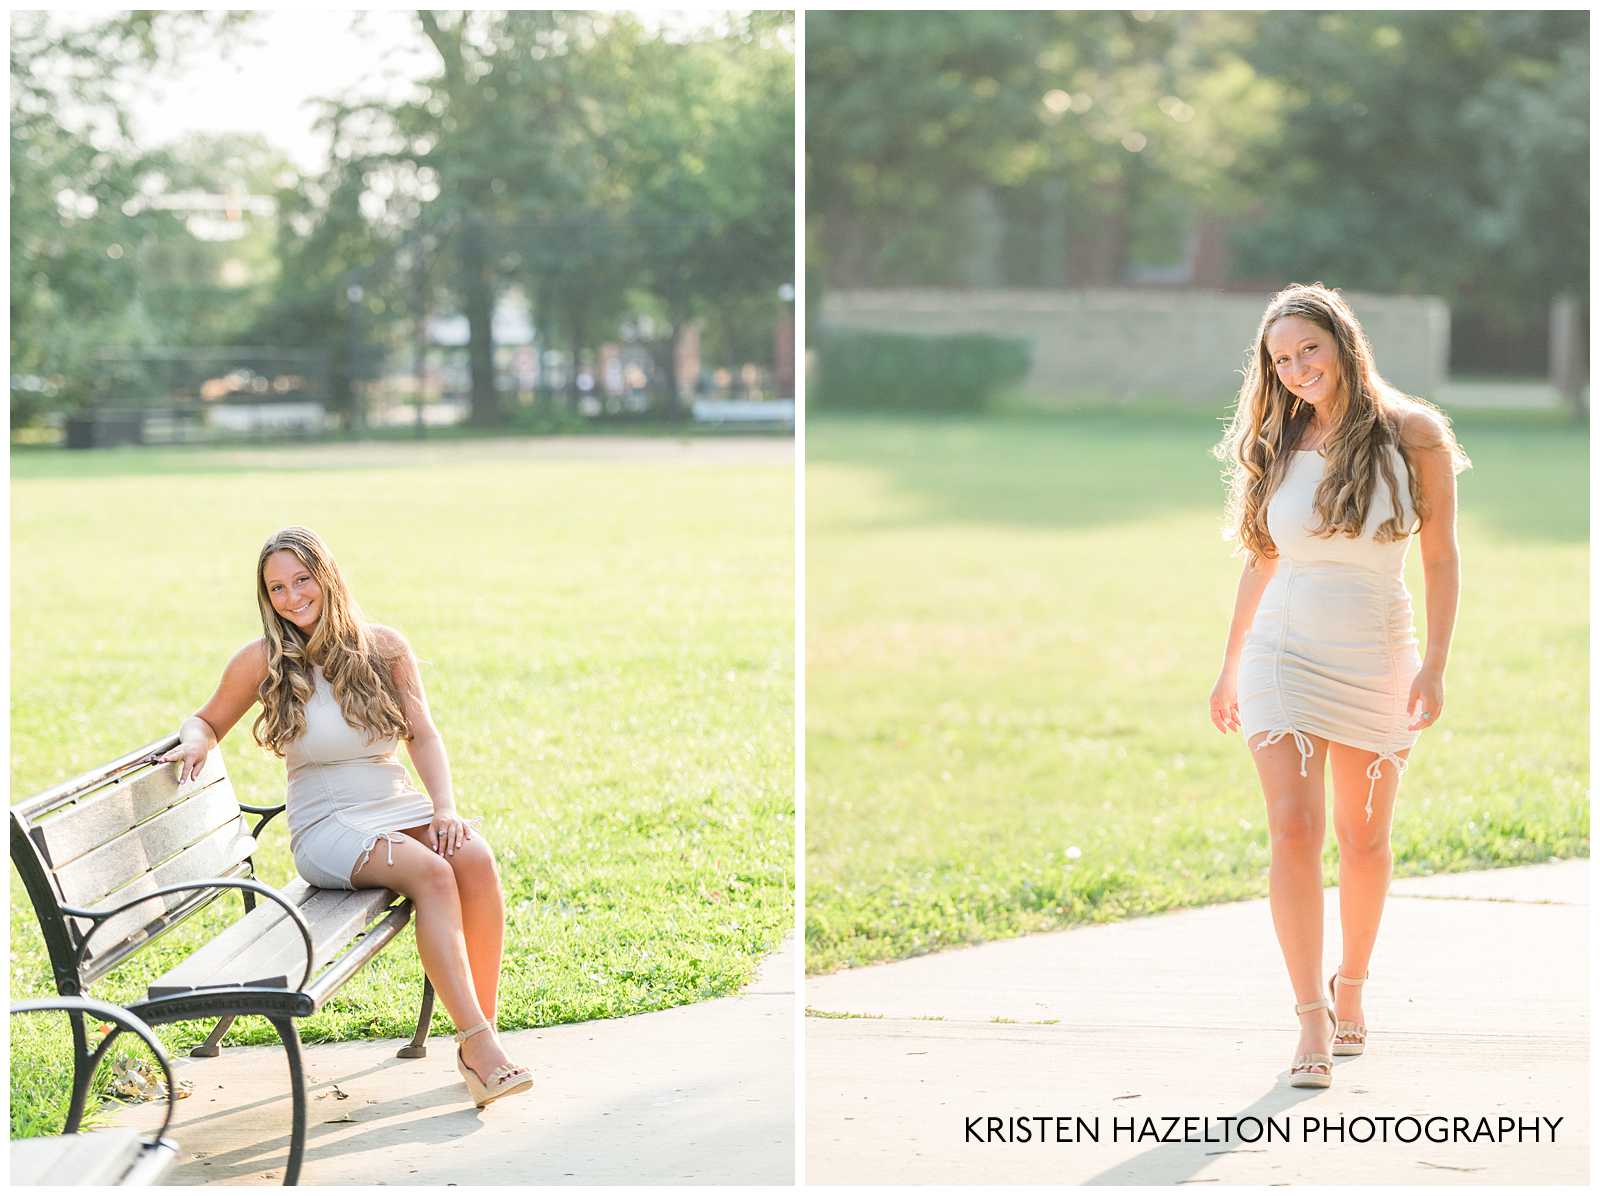 High school senior portraits of girl wearing a white dress and seated on a bench.